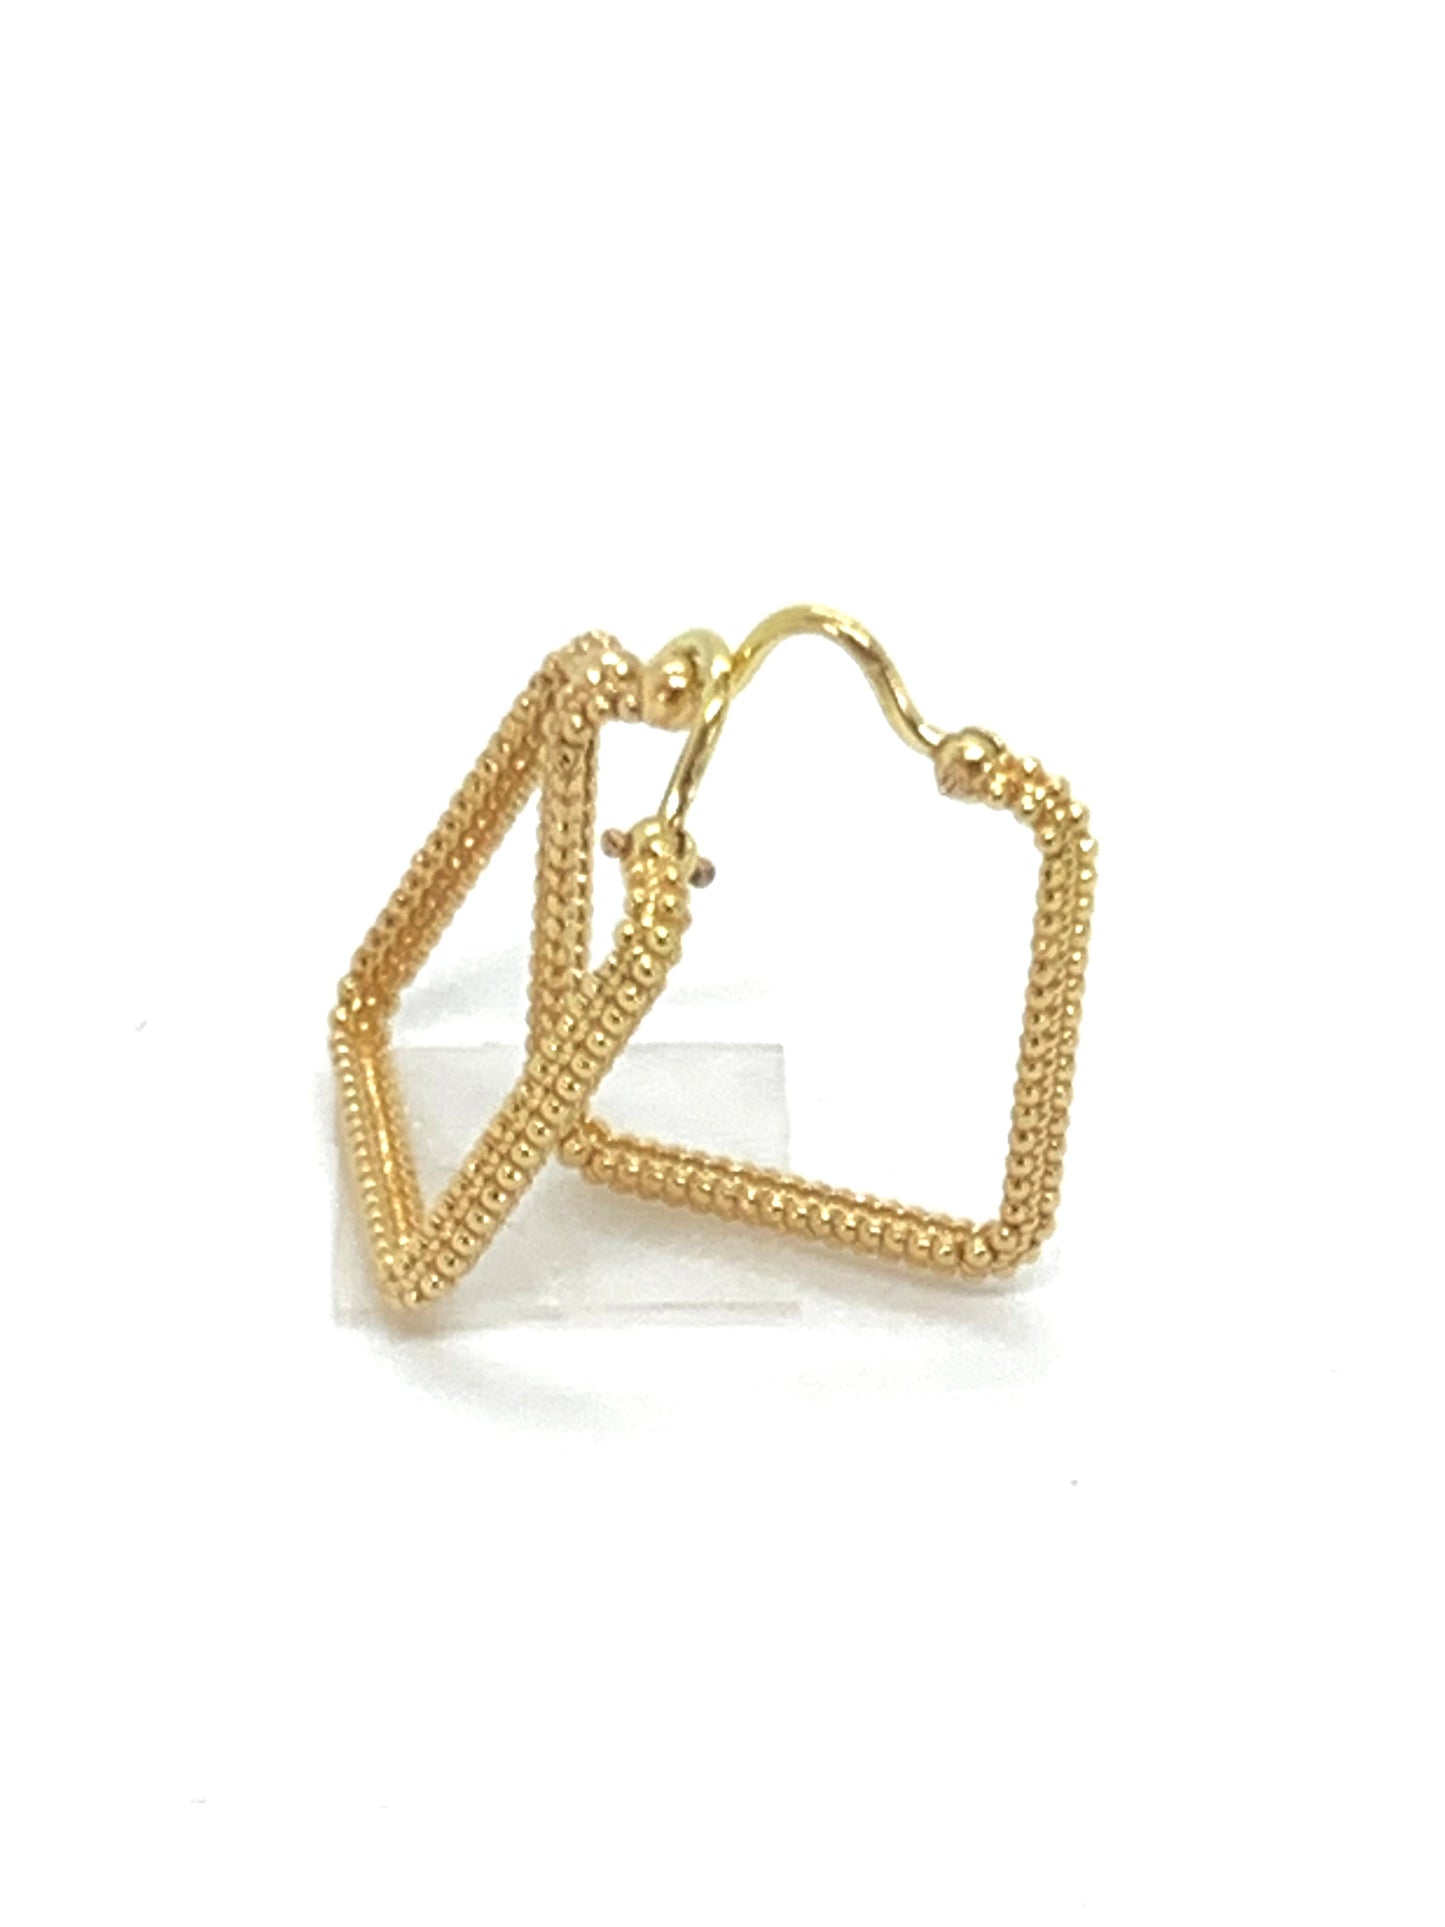 Earrings Gold 18k. Square - 'That Which Is'  Collection